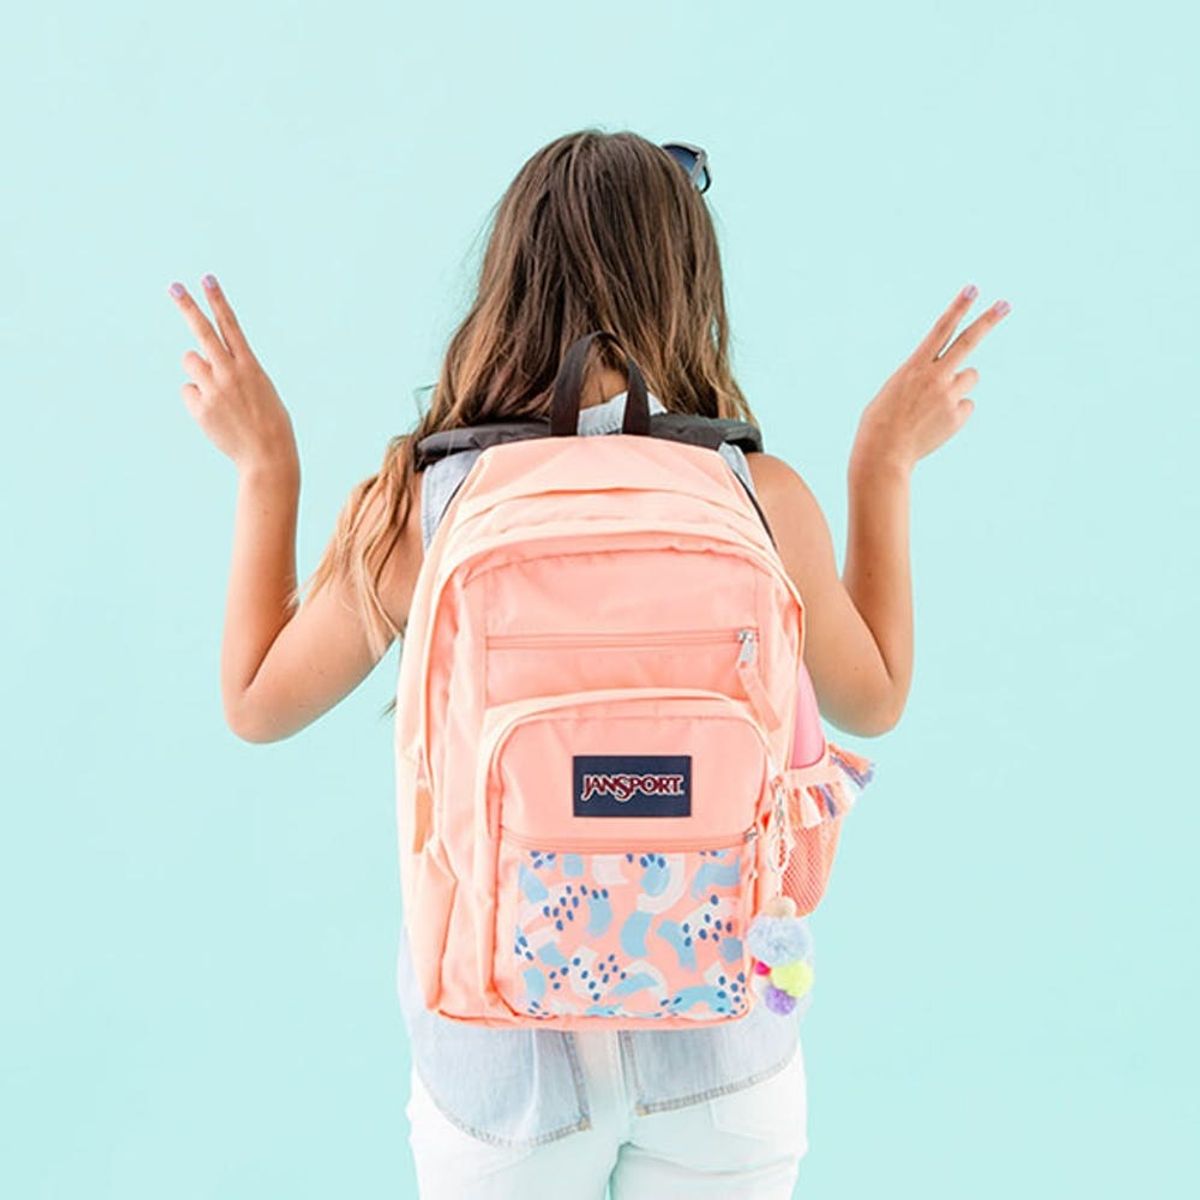 3 Fresher Than Fresh Backpack Hacks to DIY With Your Kids for Back to School